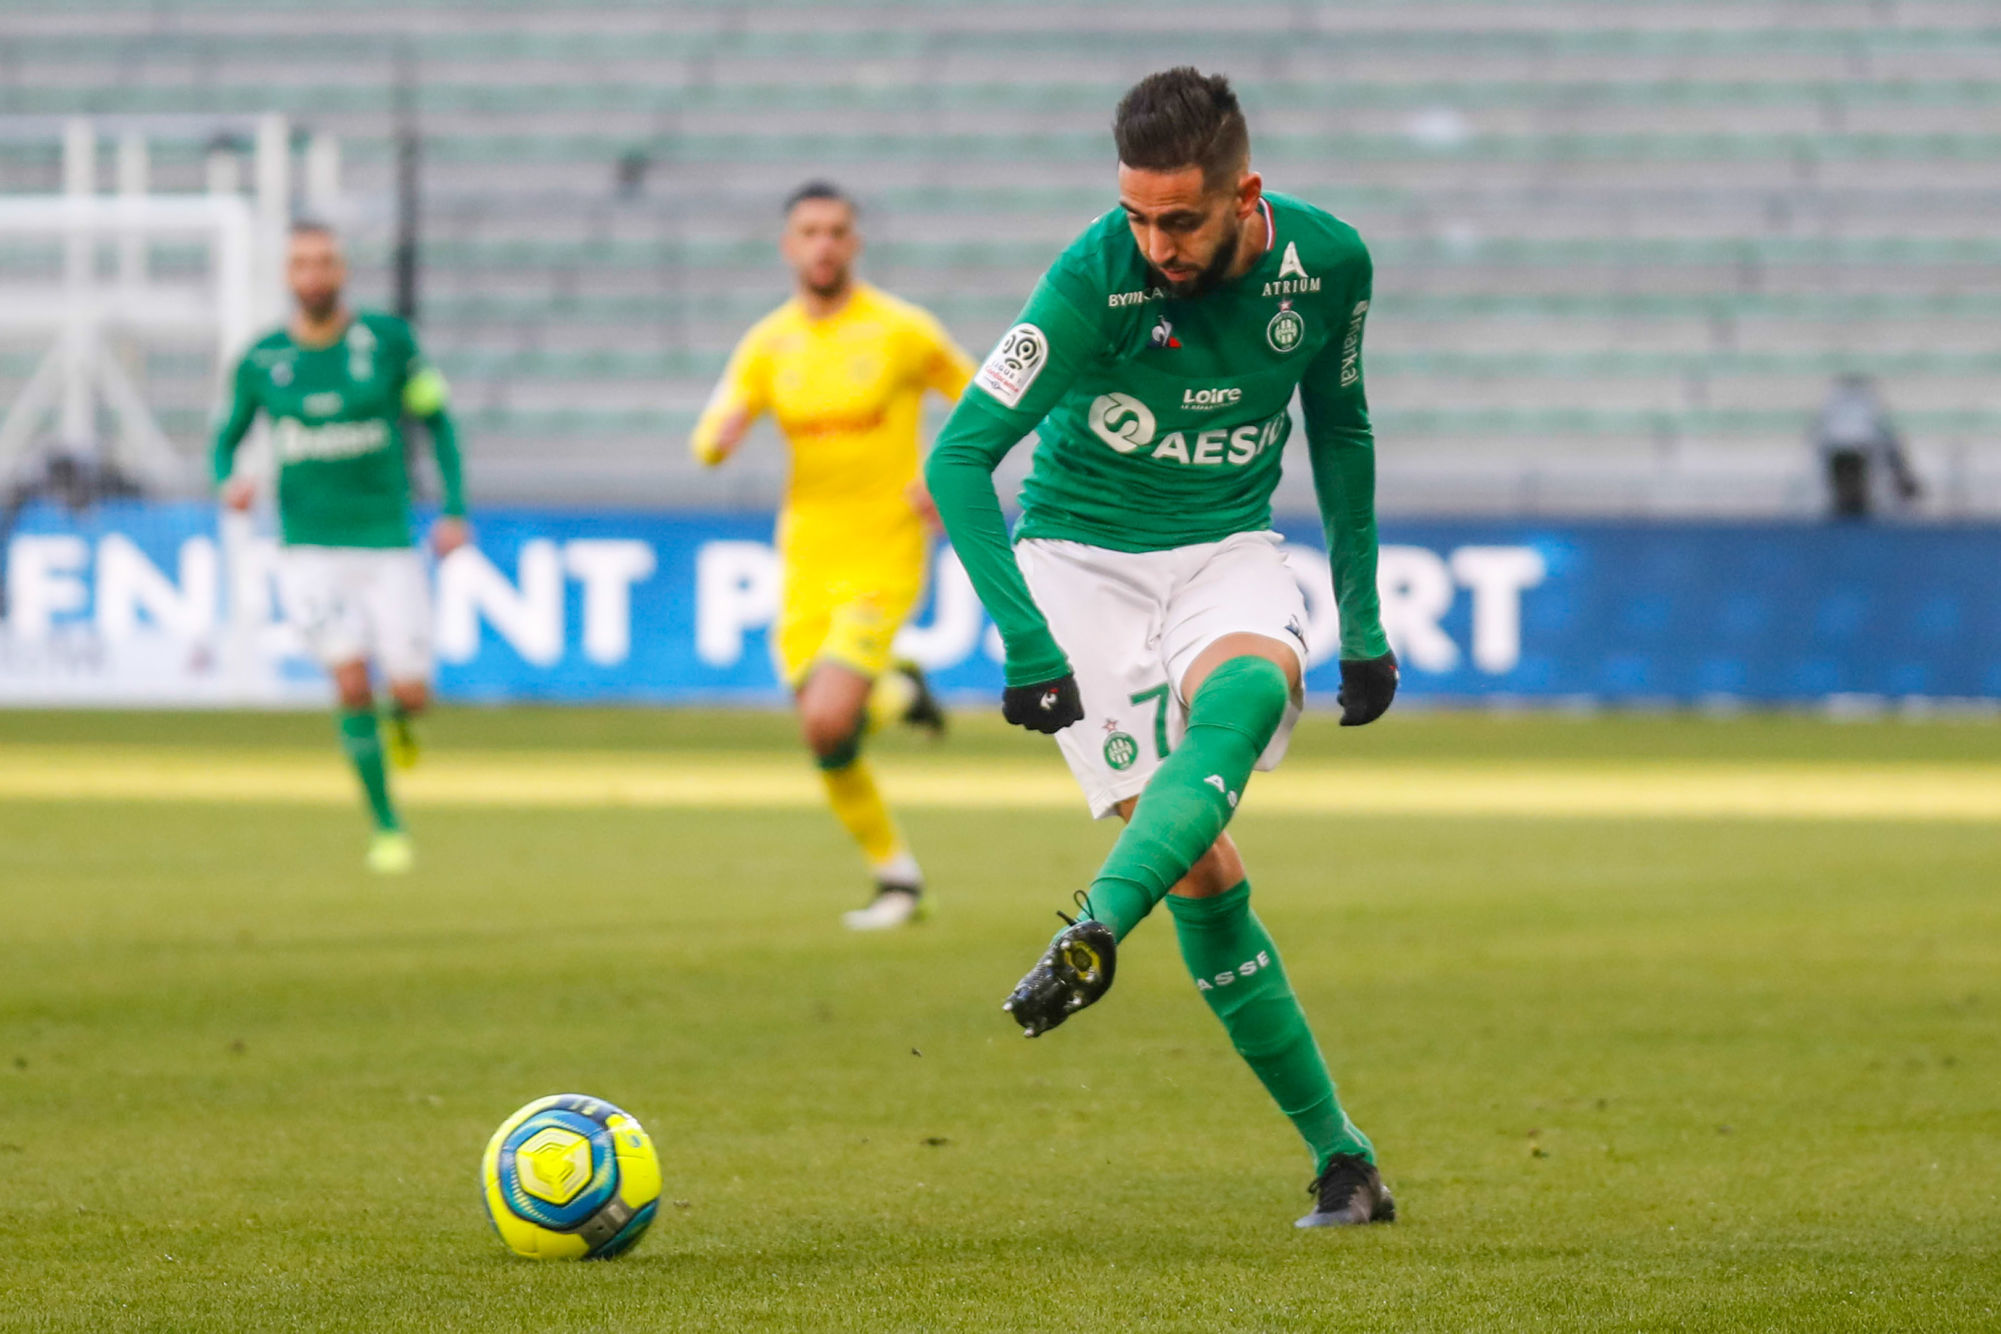 Ryad BOUDEBOUZ of Saint Etienne during the Ligue 1 match between AS Saint-Etienne and FC Nantes at Stade Geoffroy-Guichard on January 12, 2020 in Saint-Etienne, France. (Photo by Romain Biard/Icon Sport) - Ryad BOUDEBOUZ - Stade Geoffroy-Guichard - Saint Etienne (France)